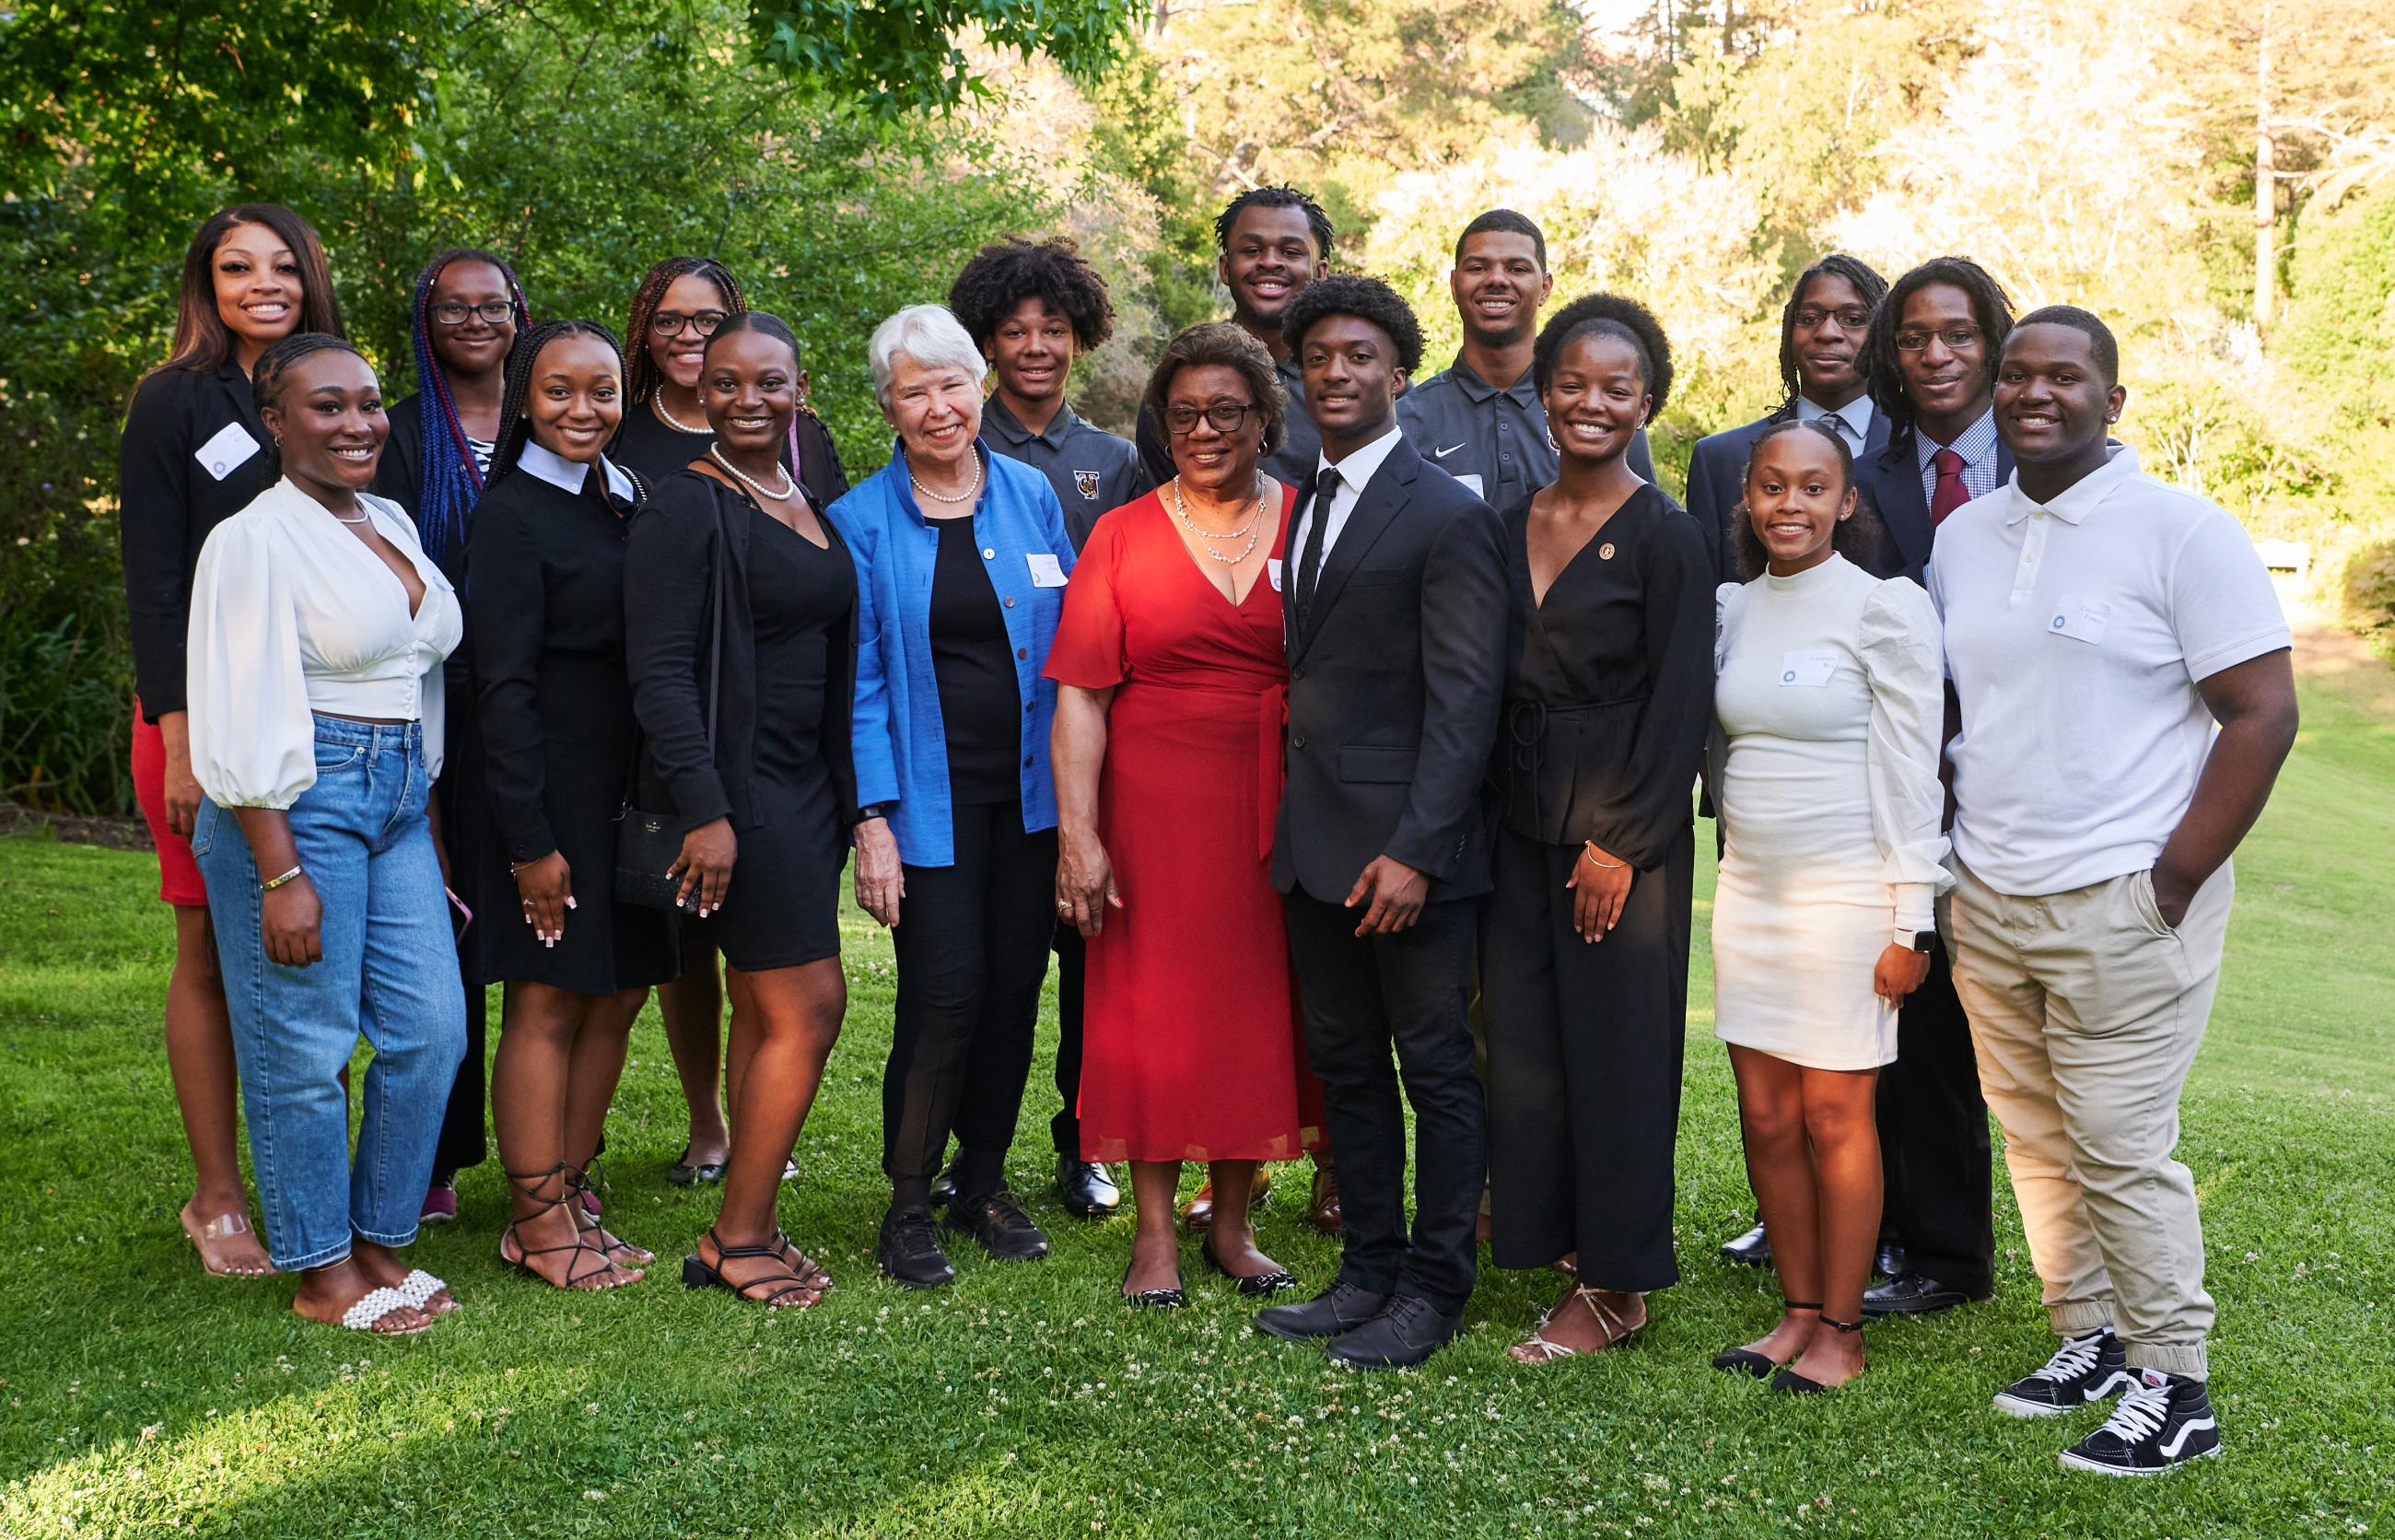 Chancellor Christ (center left) and President Morris (center right) with the Tuskegee Scholars at the Berkeley-Tuskegee Data Science Initiative Reception at University House on June 21, 2022. (Photo/ KLCfotos)